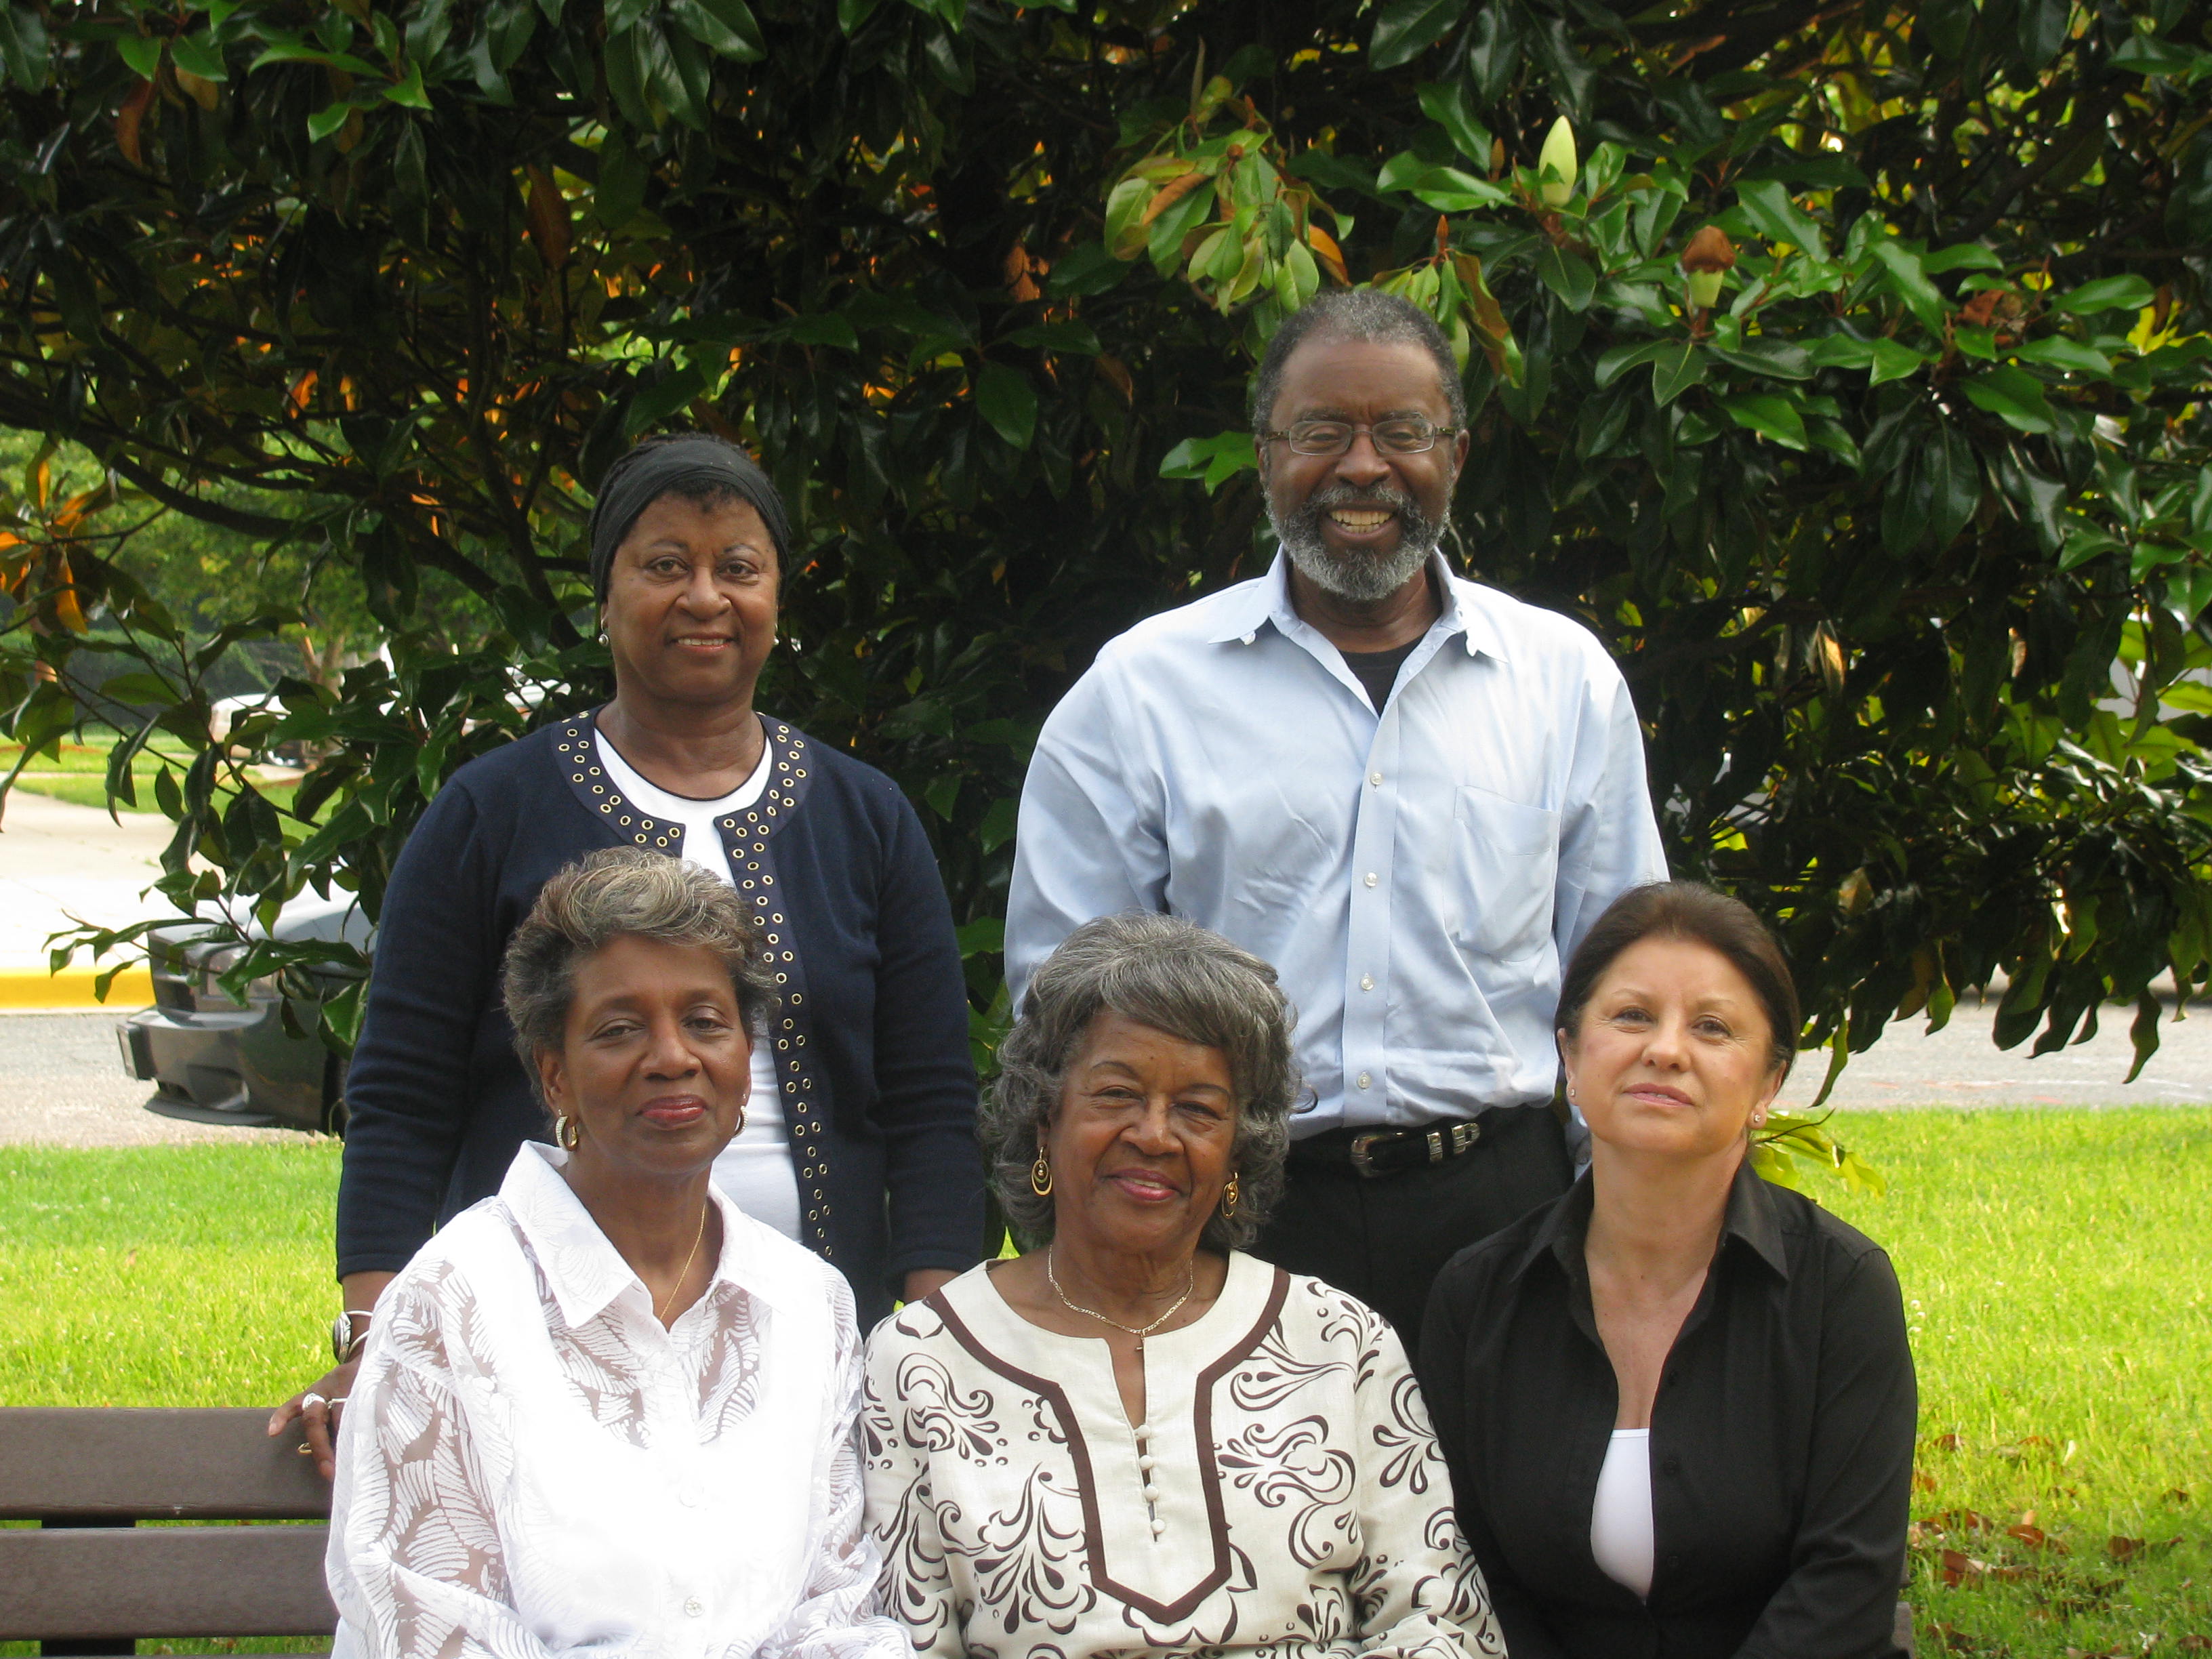 Members of project group for Lakeland African Americans in College Park